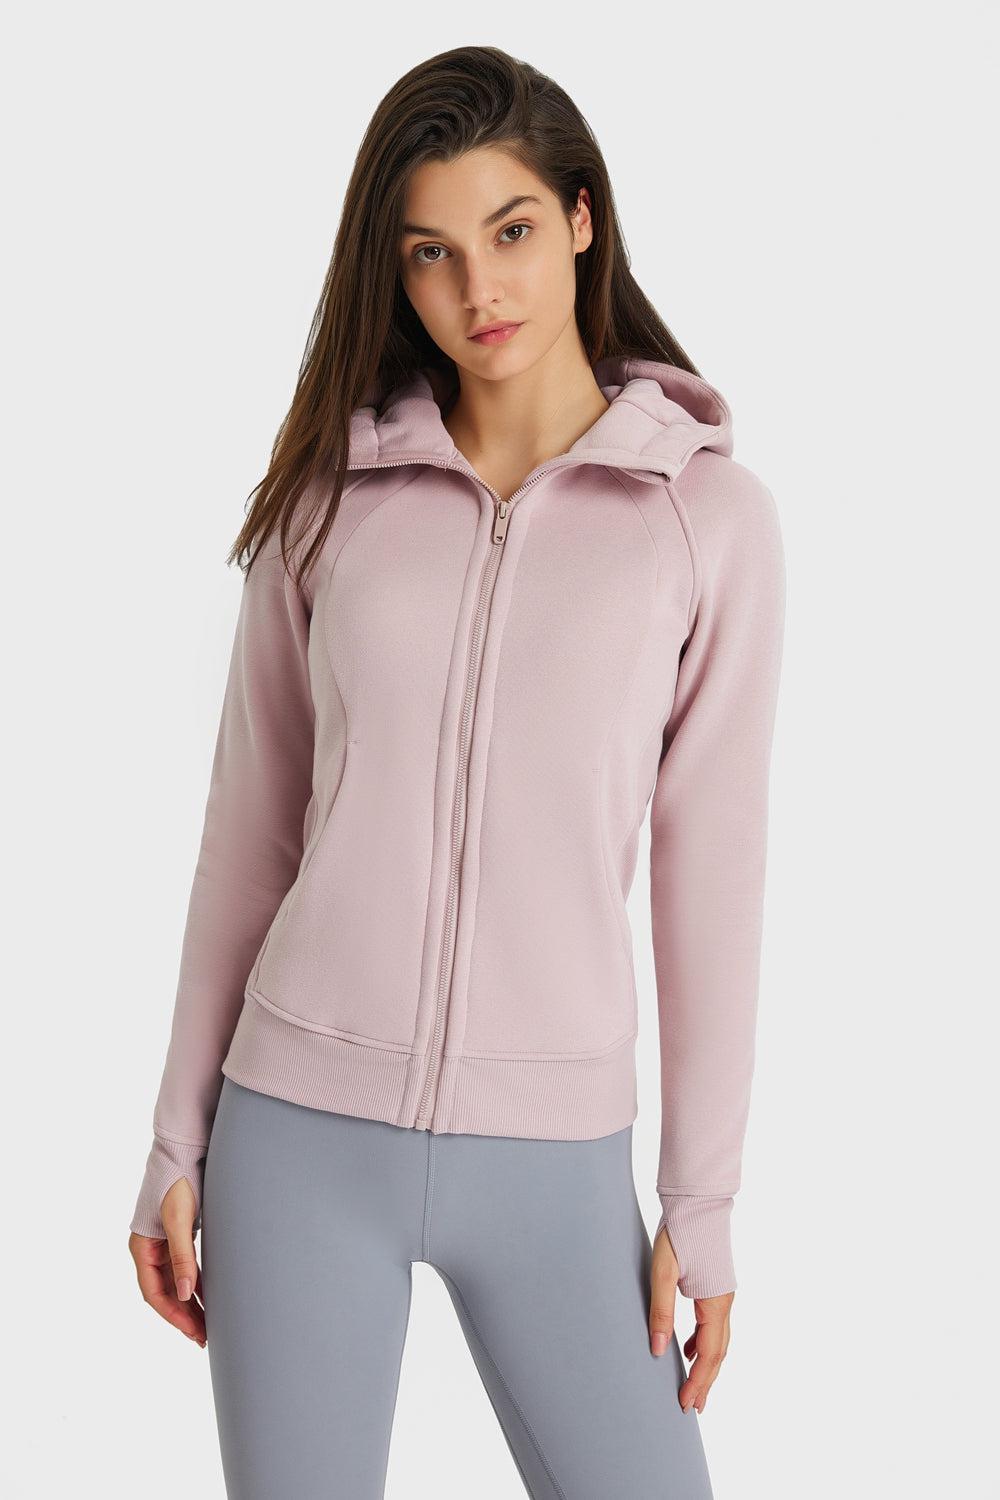 Zip Up Seam Detail Hooded Sports Jacket-TOPS / DRESSES-[Adult]-[Female]-Light Pink-4-Blue Zone Planet